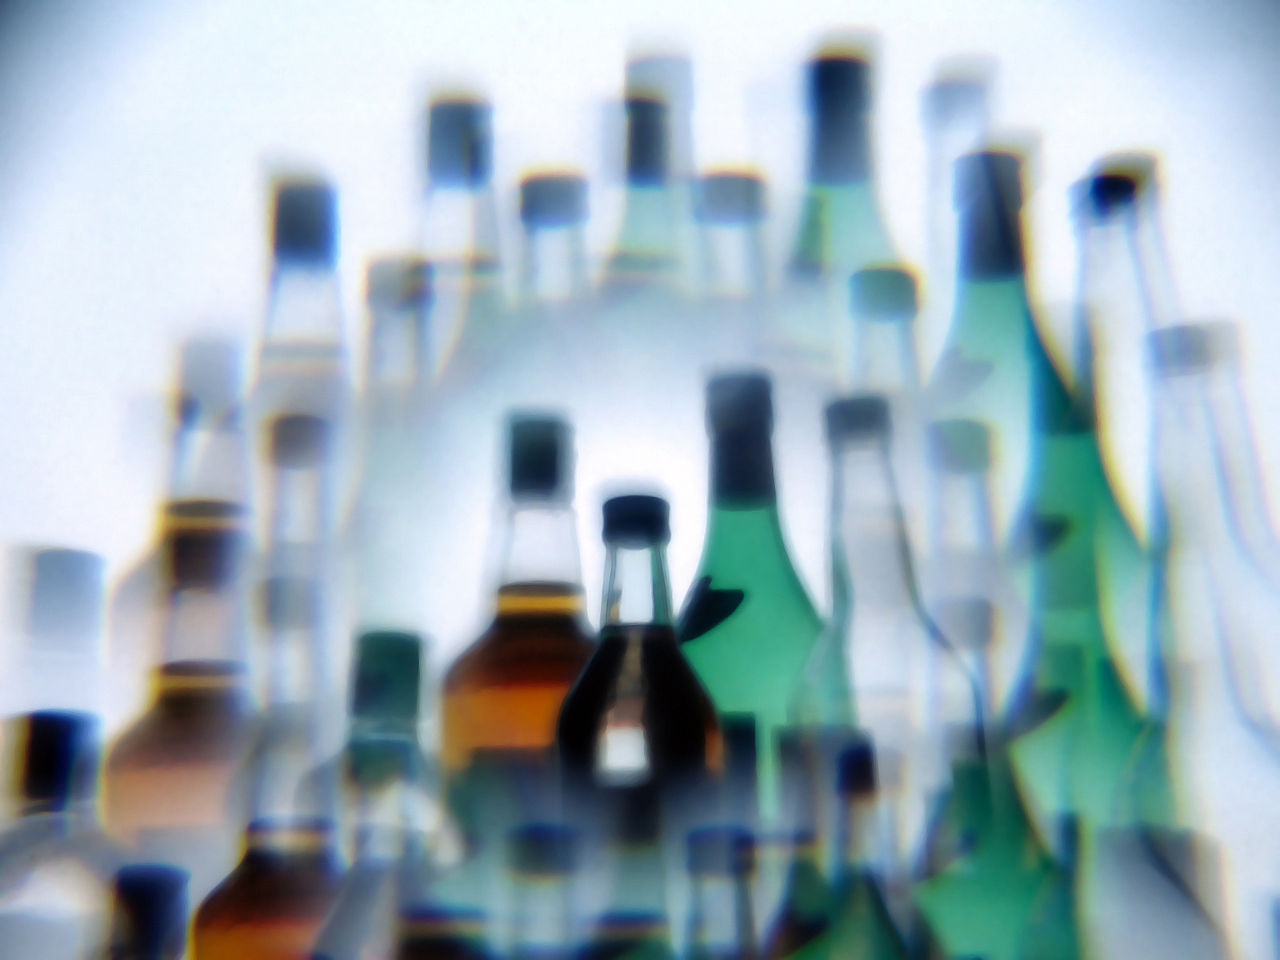 1280px-Alcohol_bottles_photographed_while_drunk